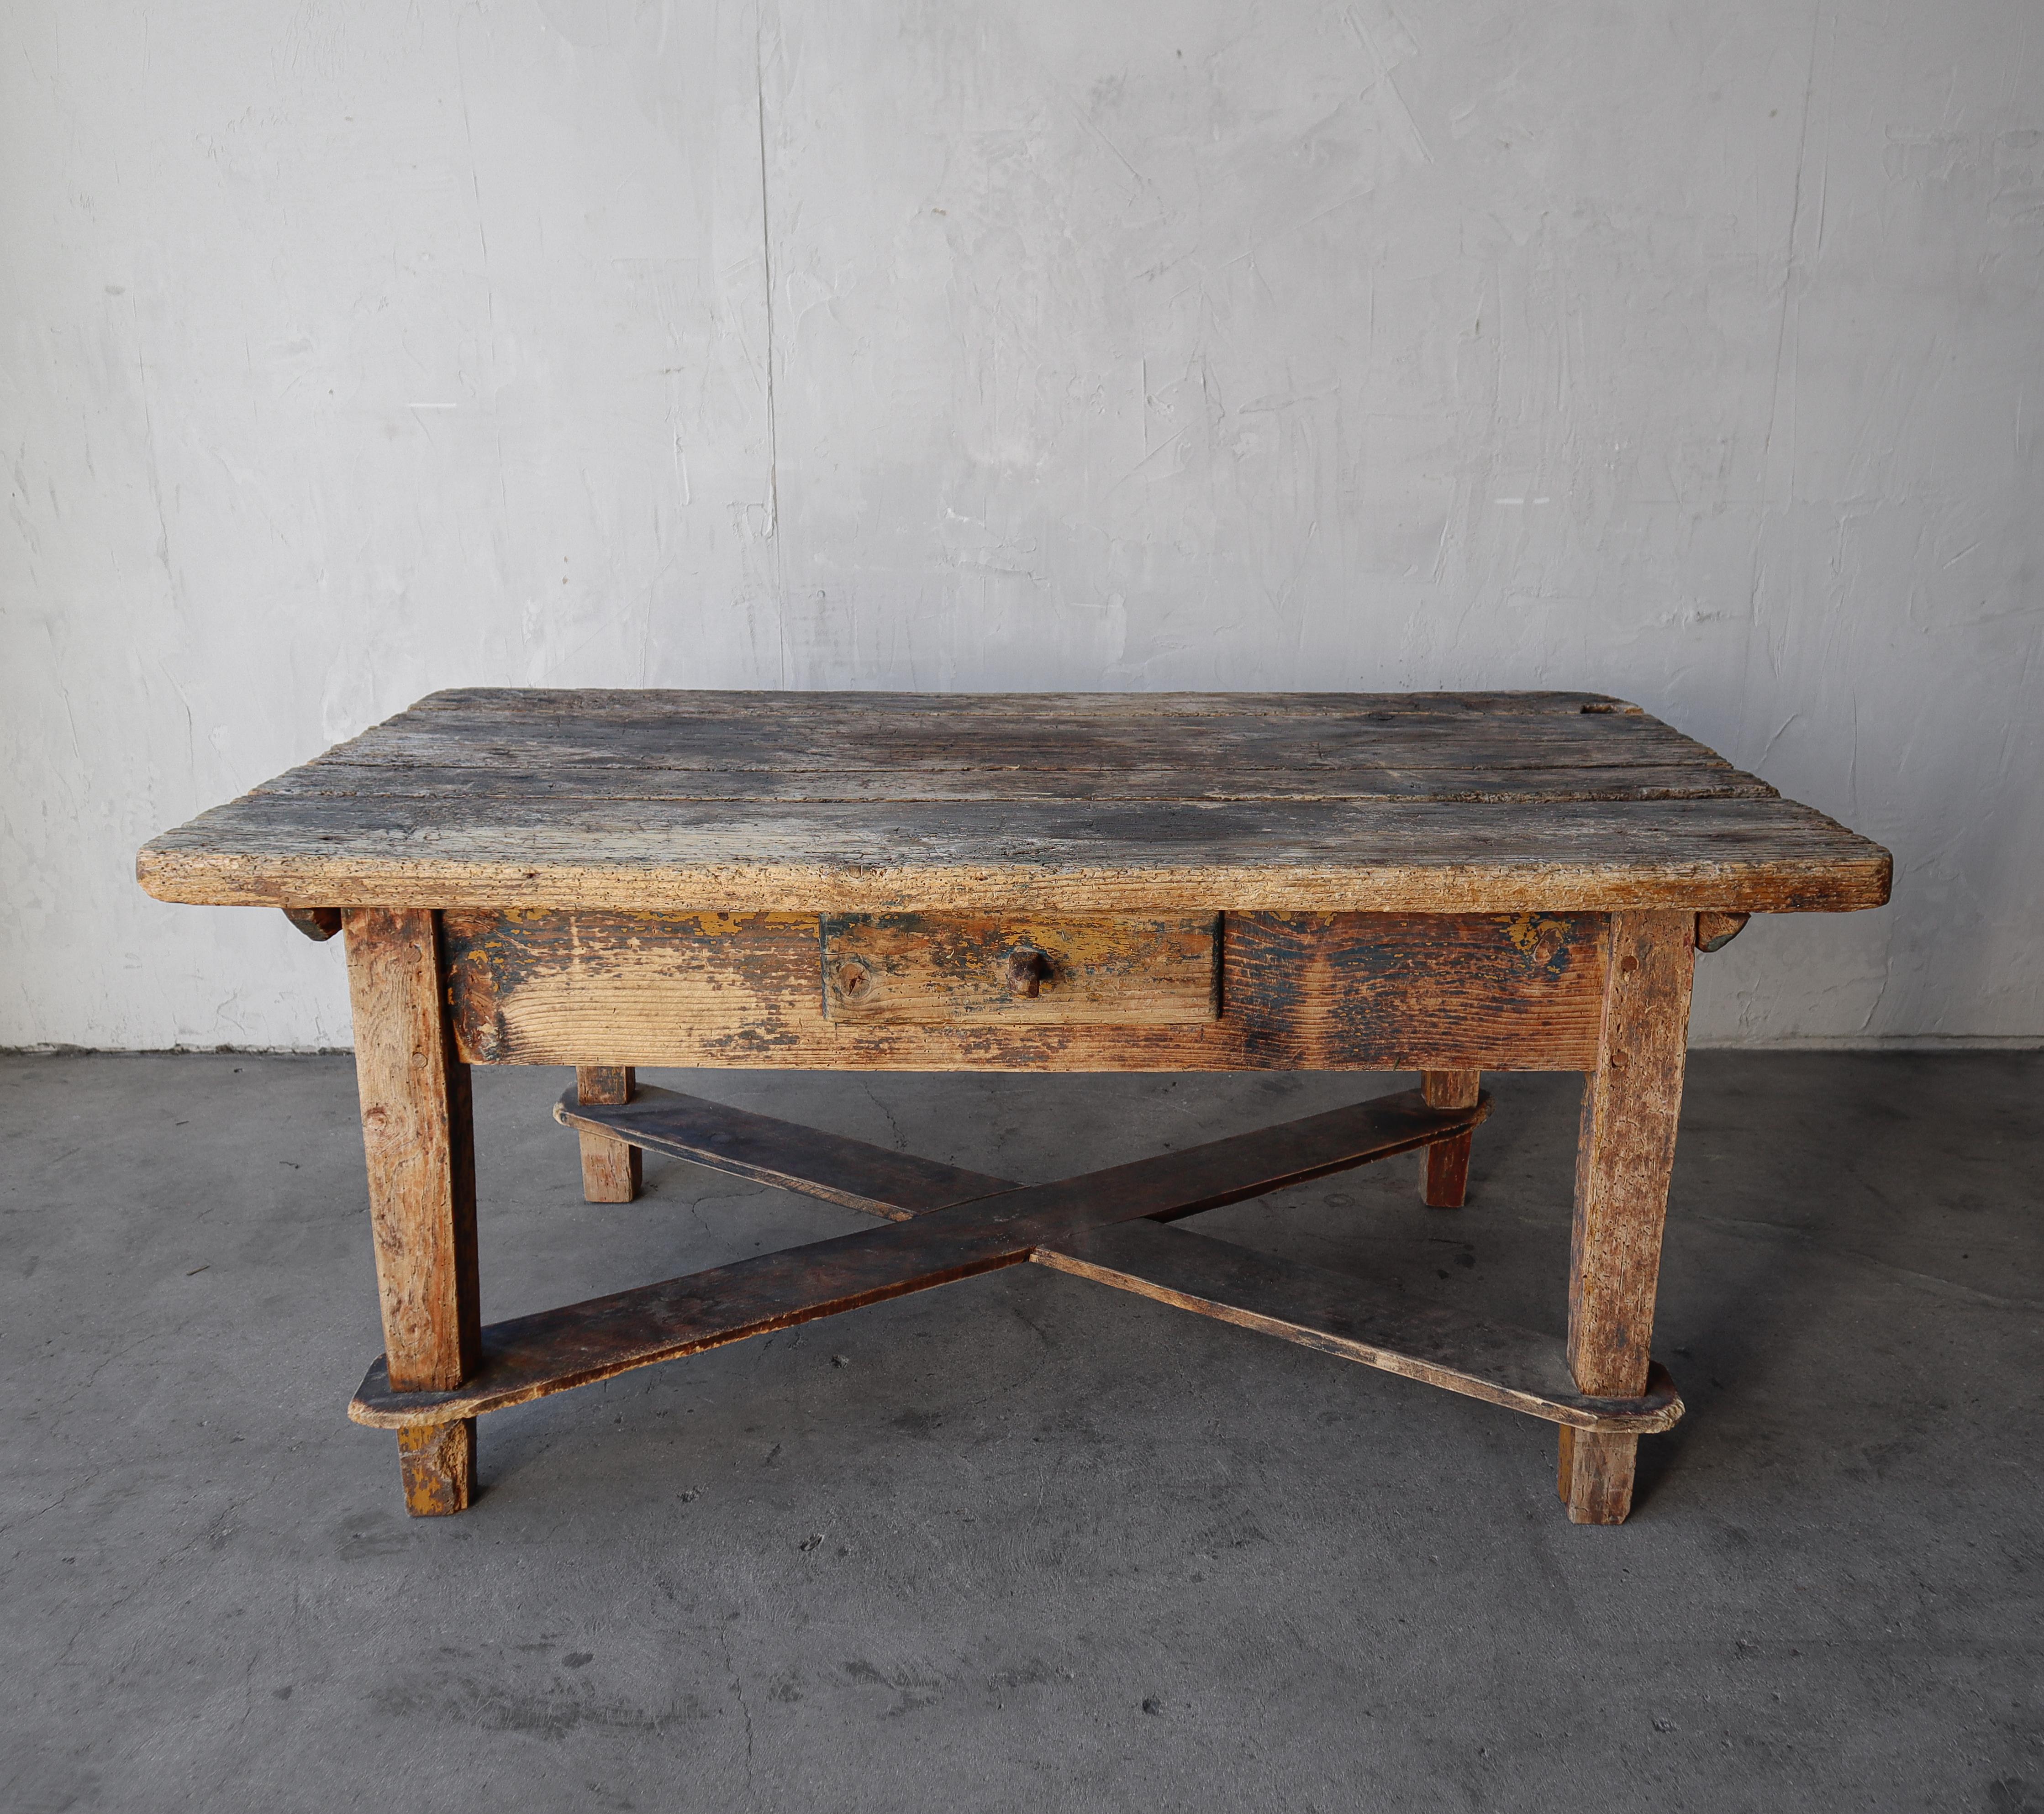 Rustic Antique Wabisabi Work Coffee Table For Sale